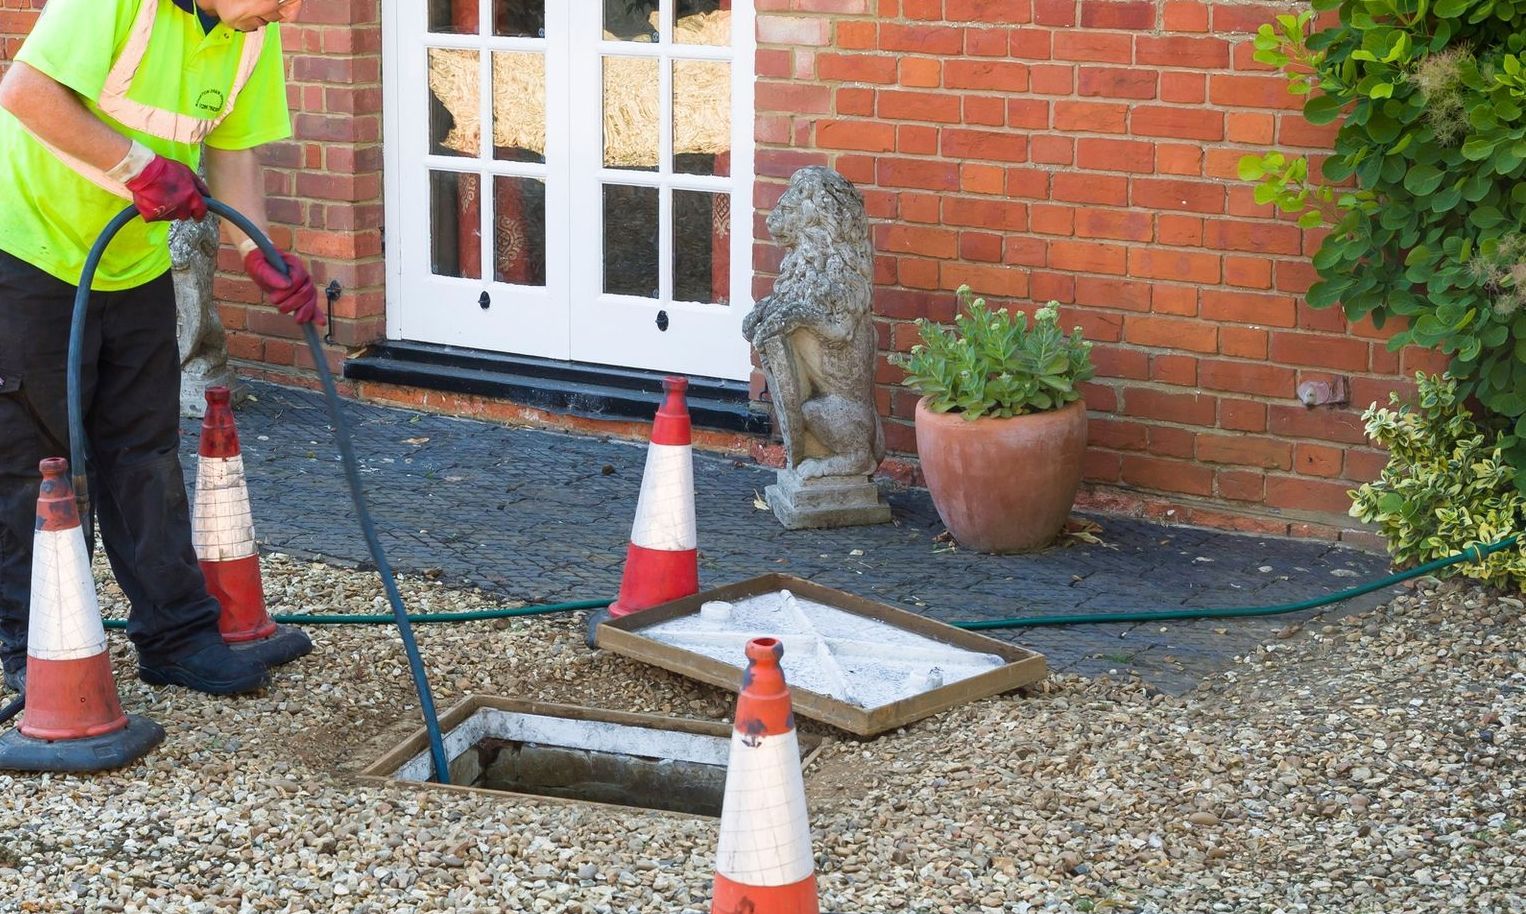 Blocked drains are a headache that no homeowner wants to deal with